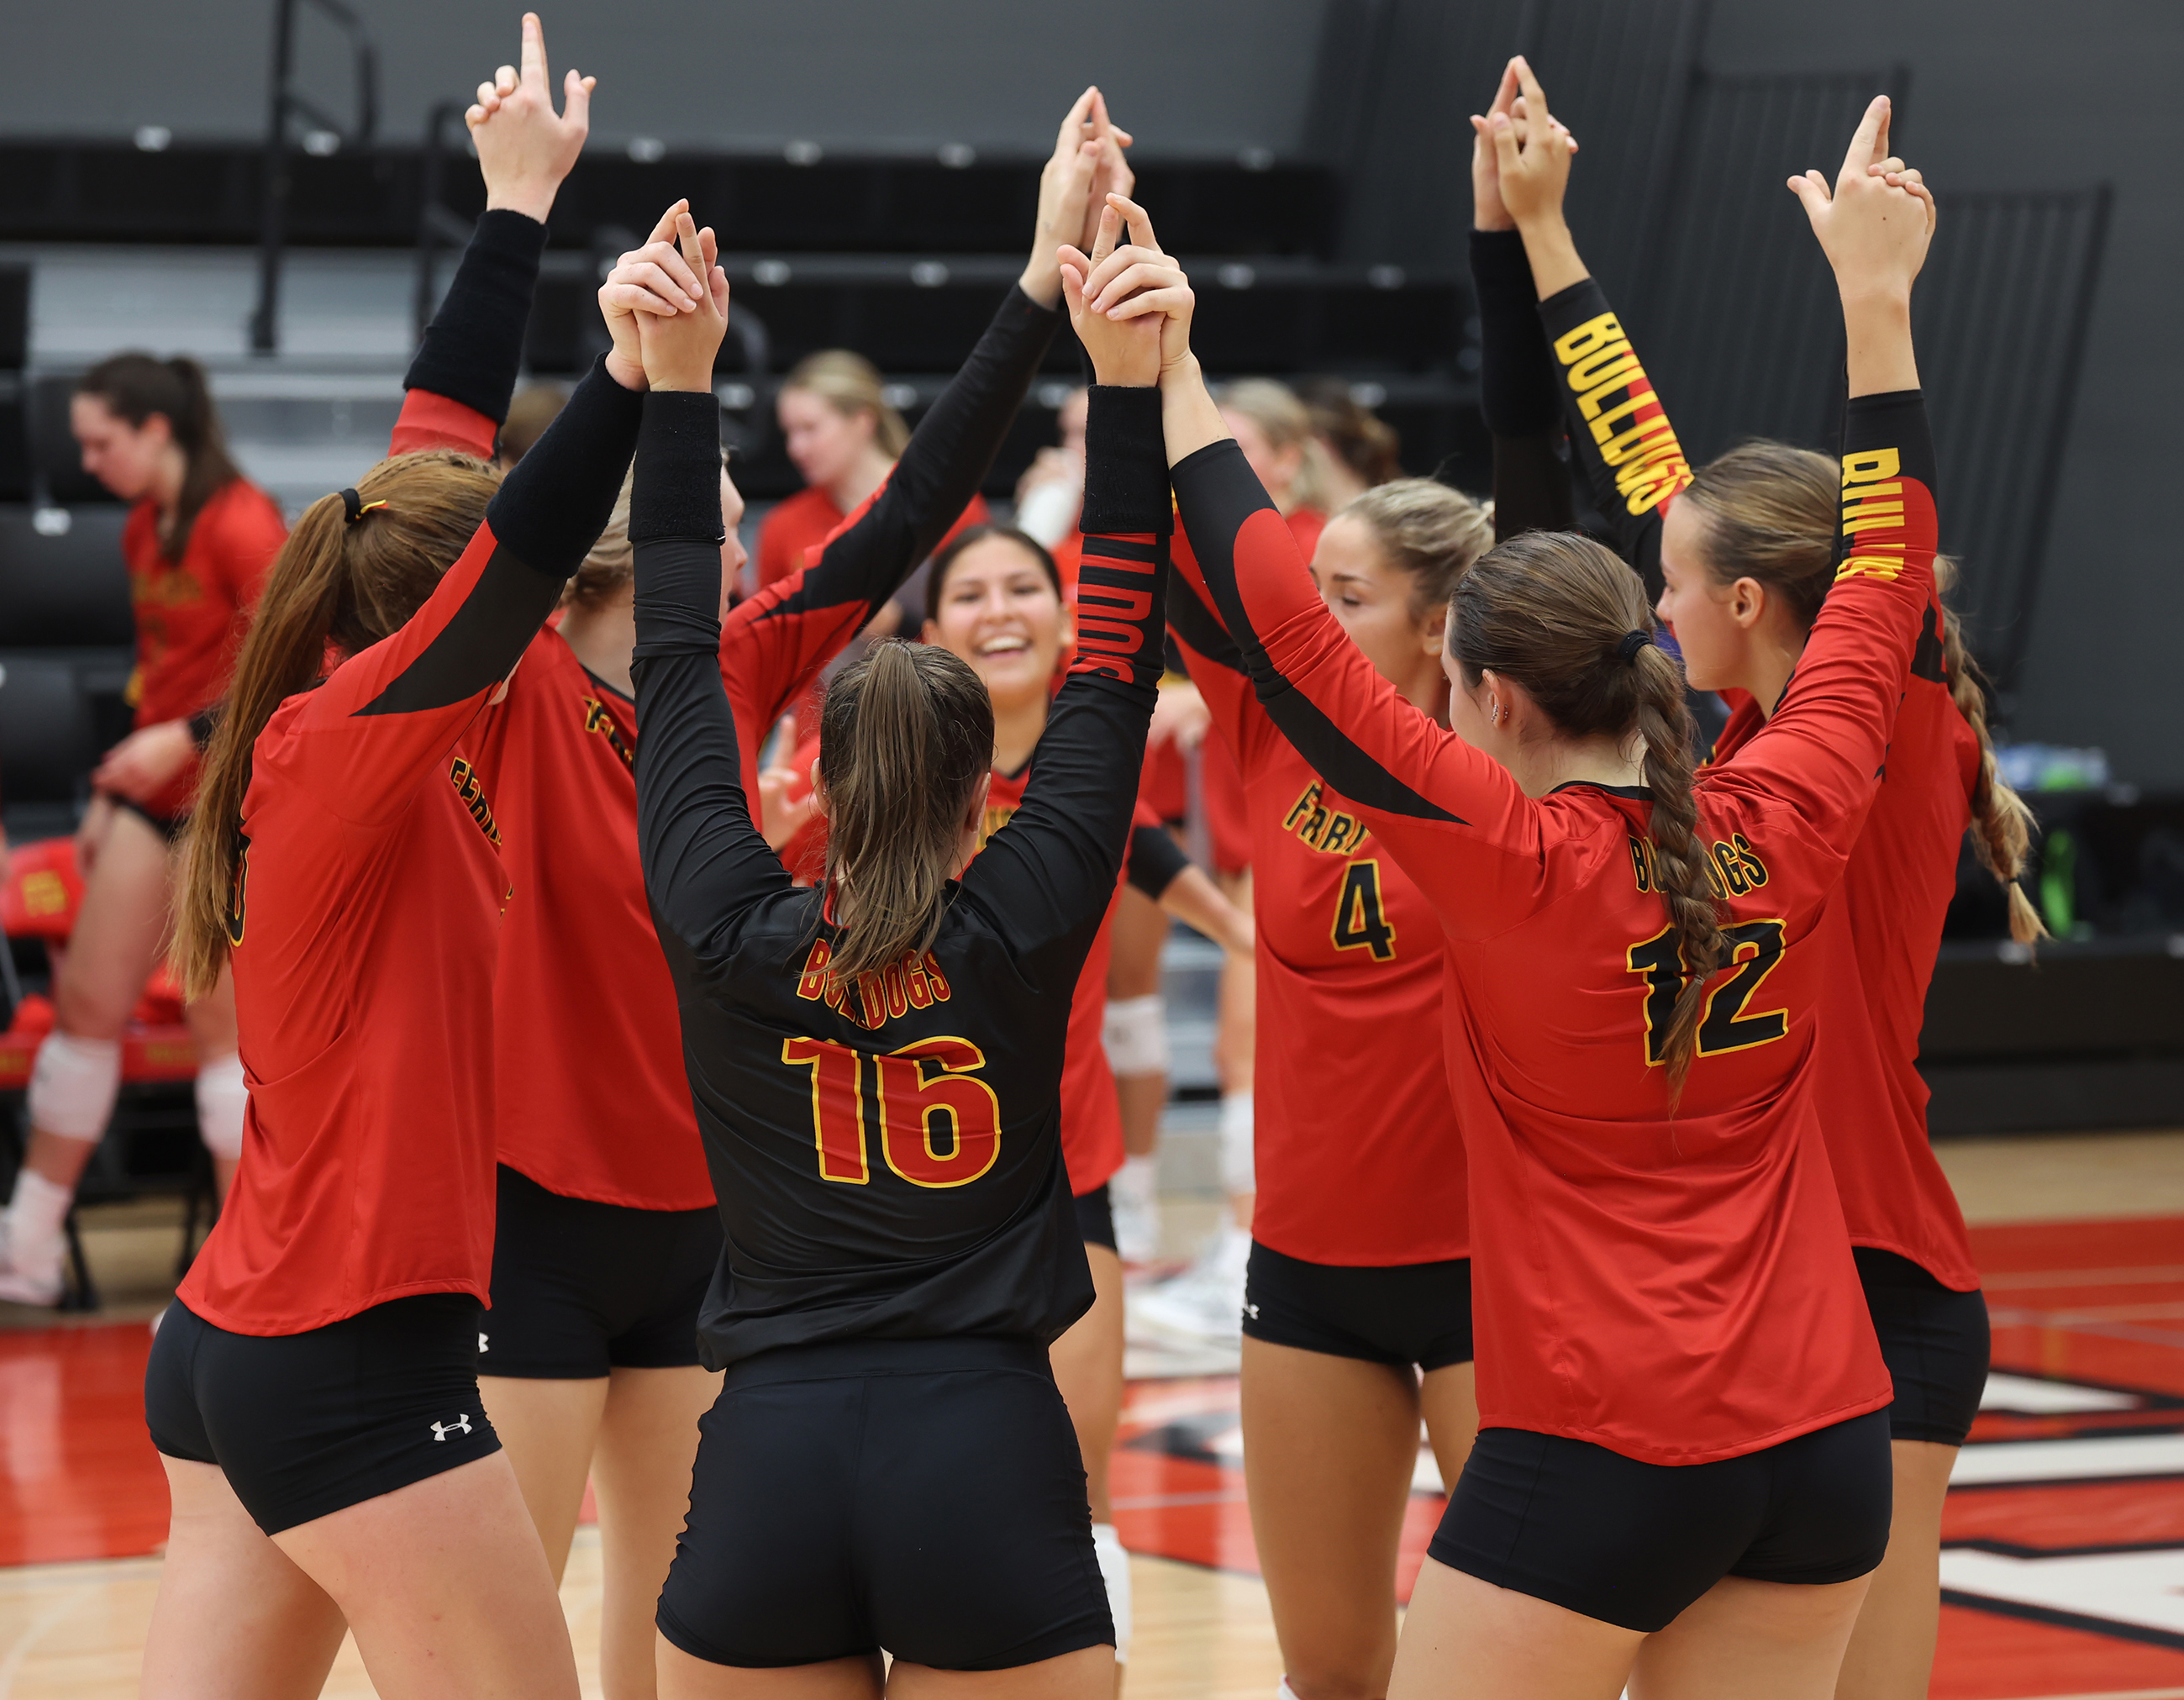 The Ferris State Volleyball Team huddles up prior to its season opening match against Thomas More on Friday, Sept. 1. This was the first officially volleyball match in the new Bulldog Arena.